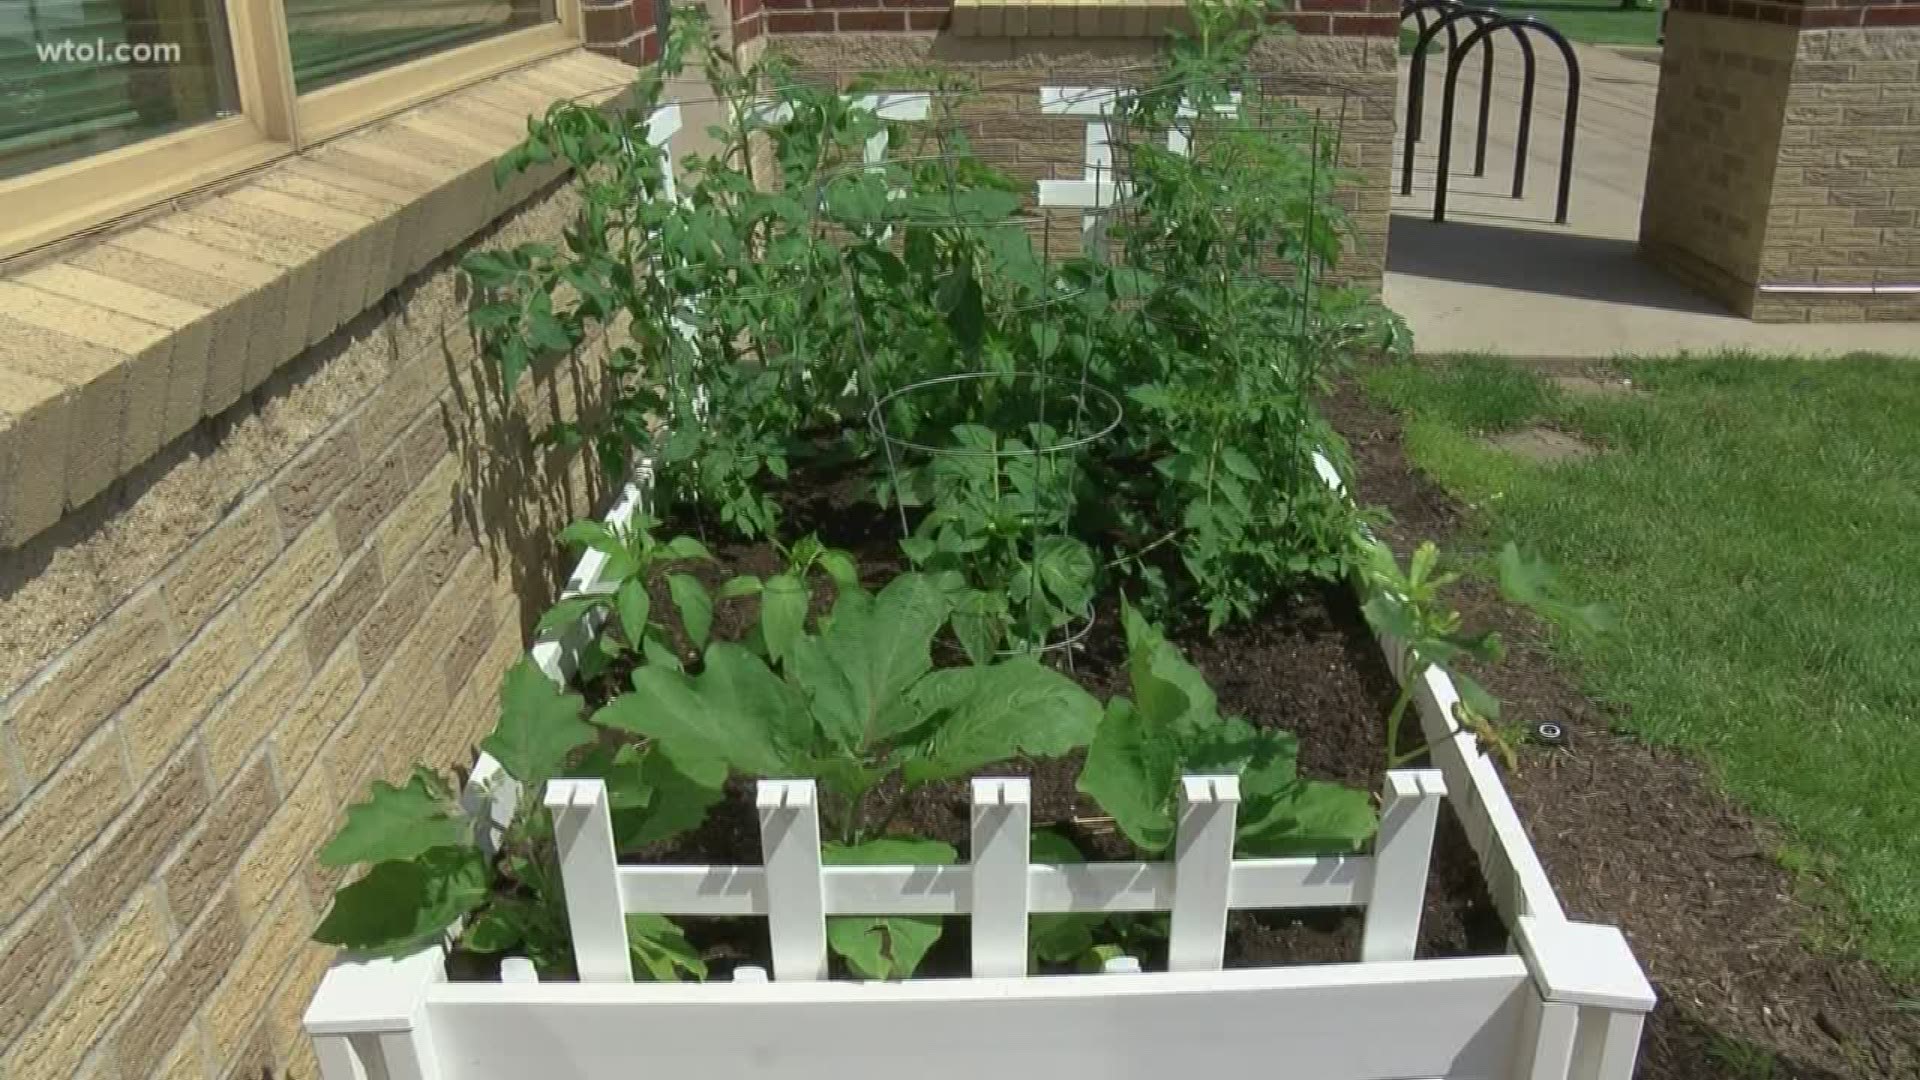 Box gardens at each branch of the library are tended to by volunteers. The produce is free for the community to take.